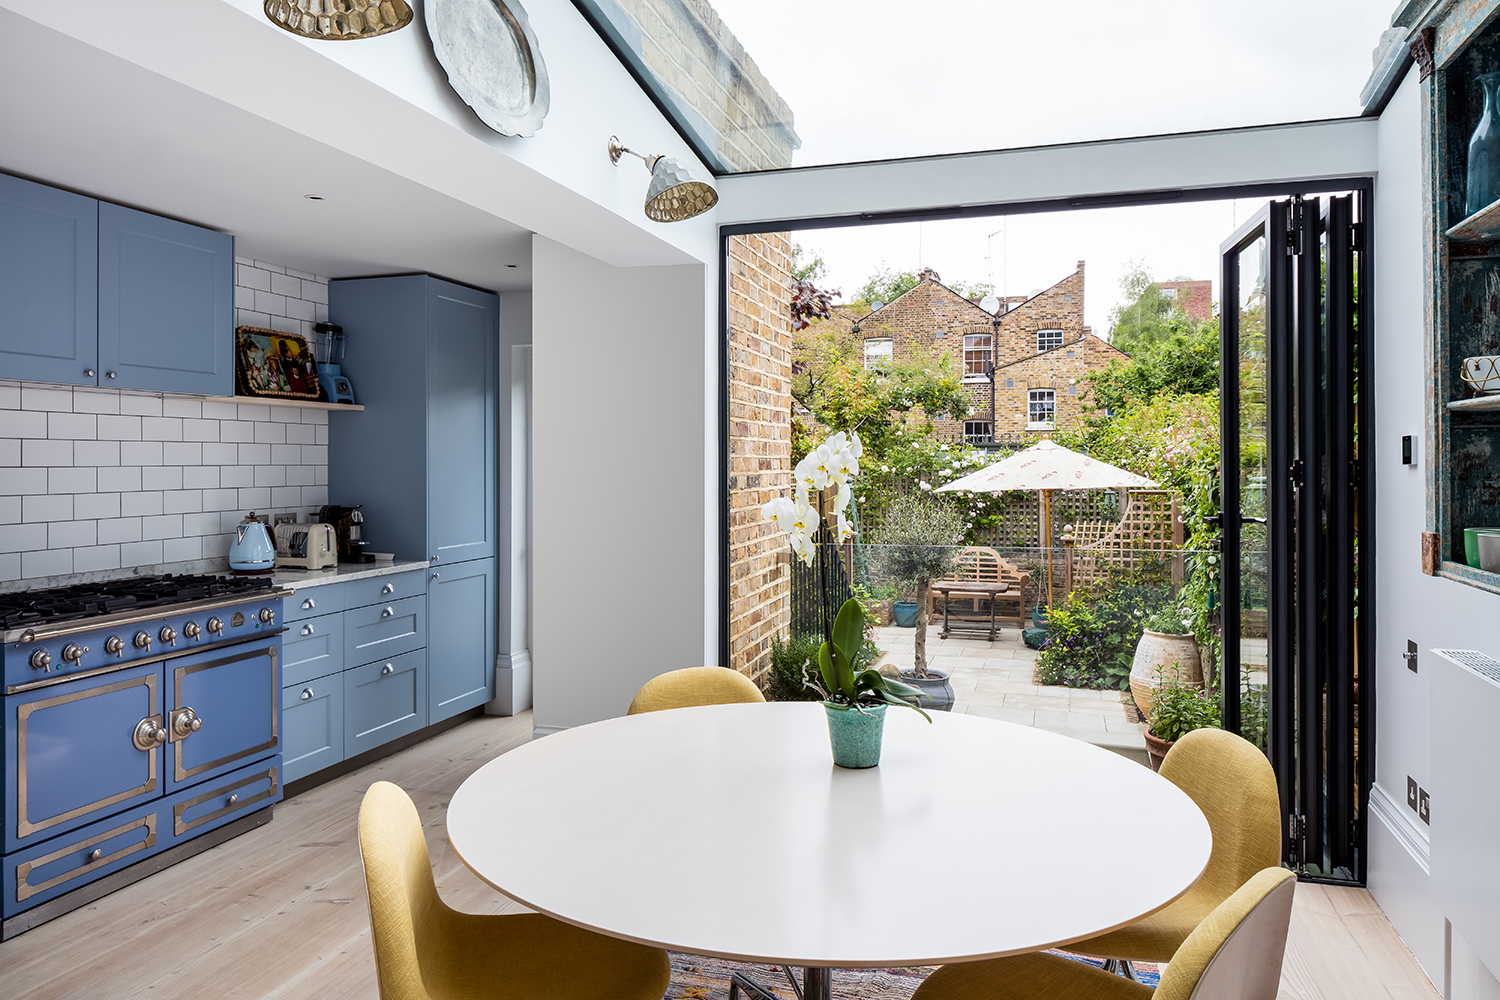 small kitchen extensions ideas for getting them right | livingetc